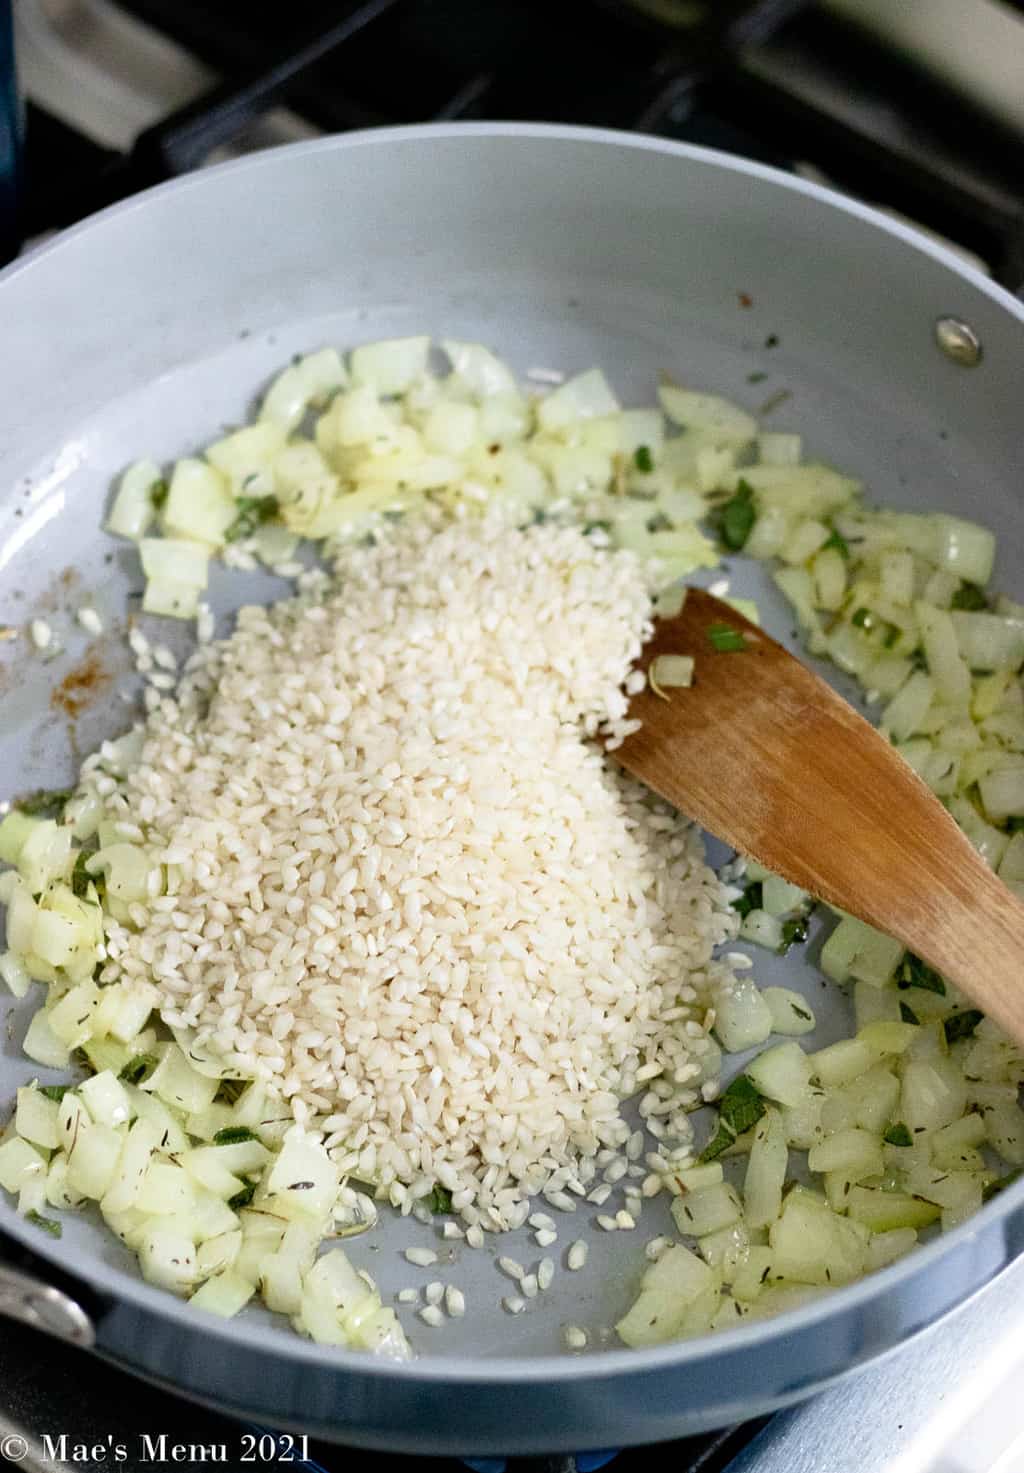 Adding arborio rice to the saute pan with the onions and herbs